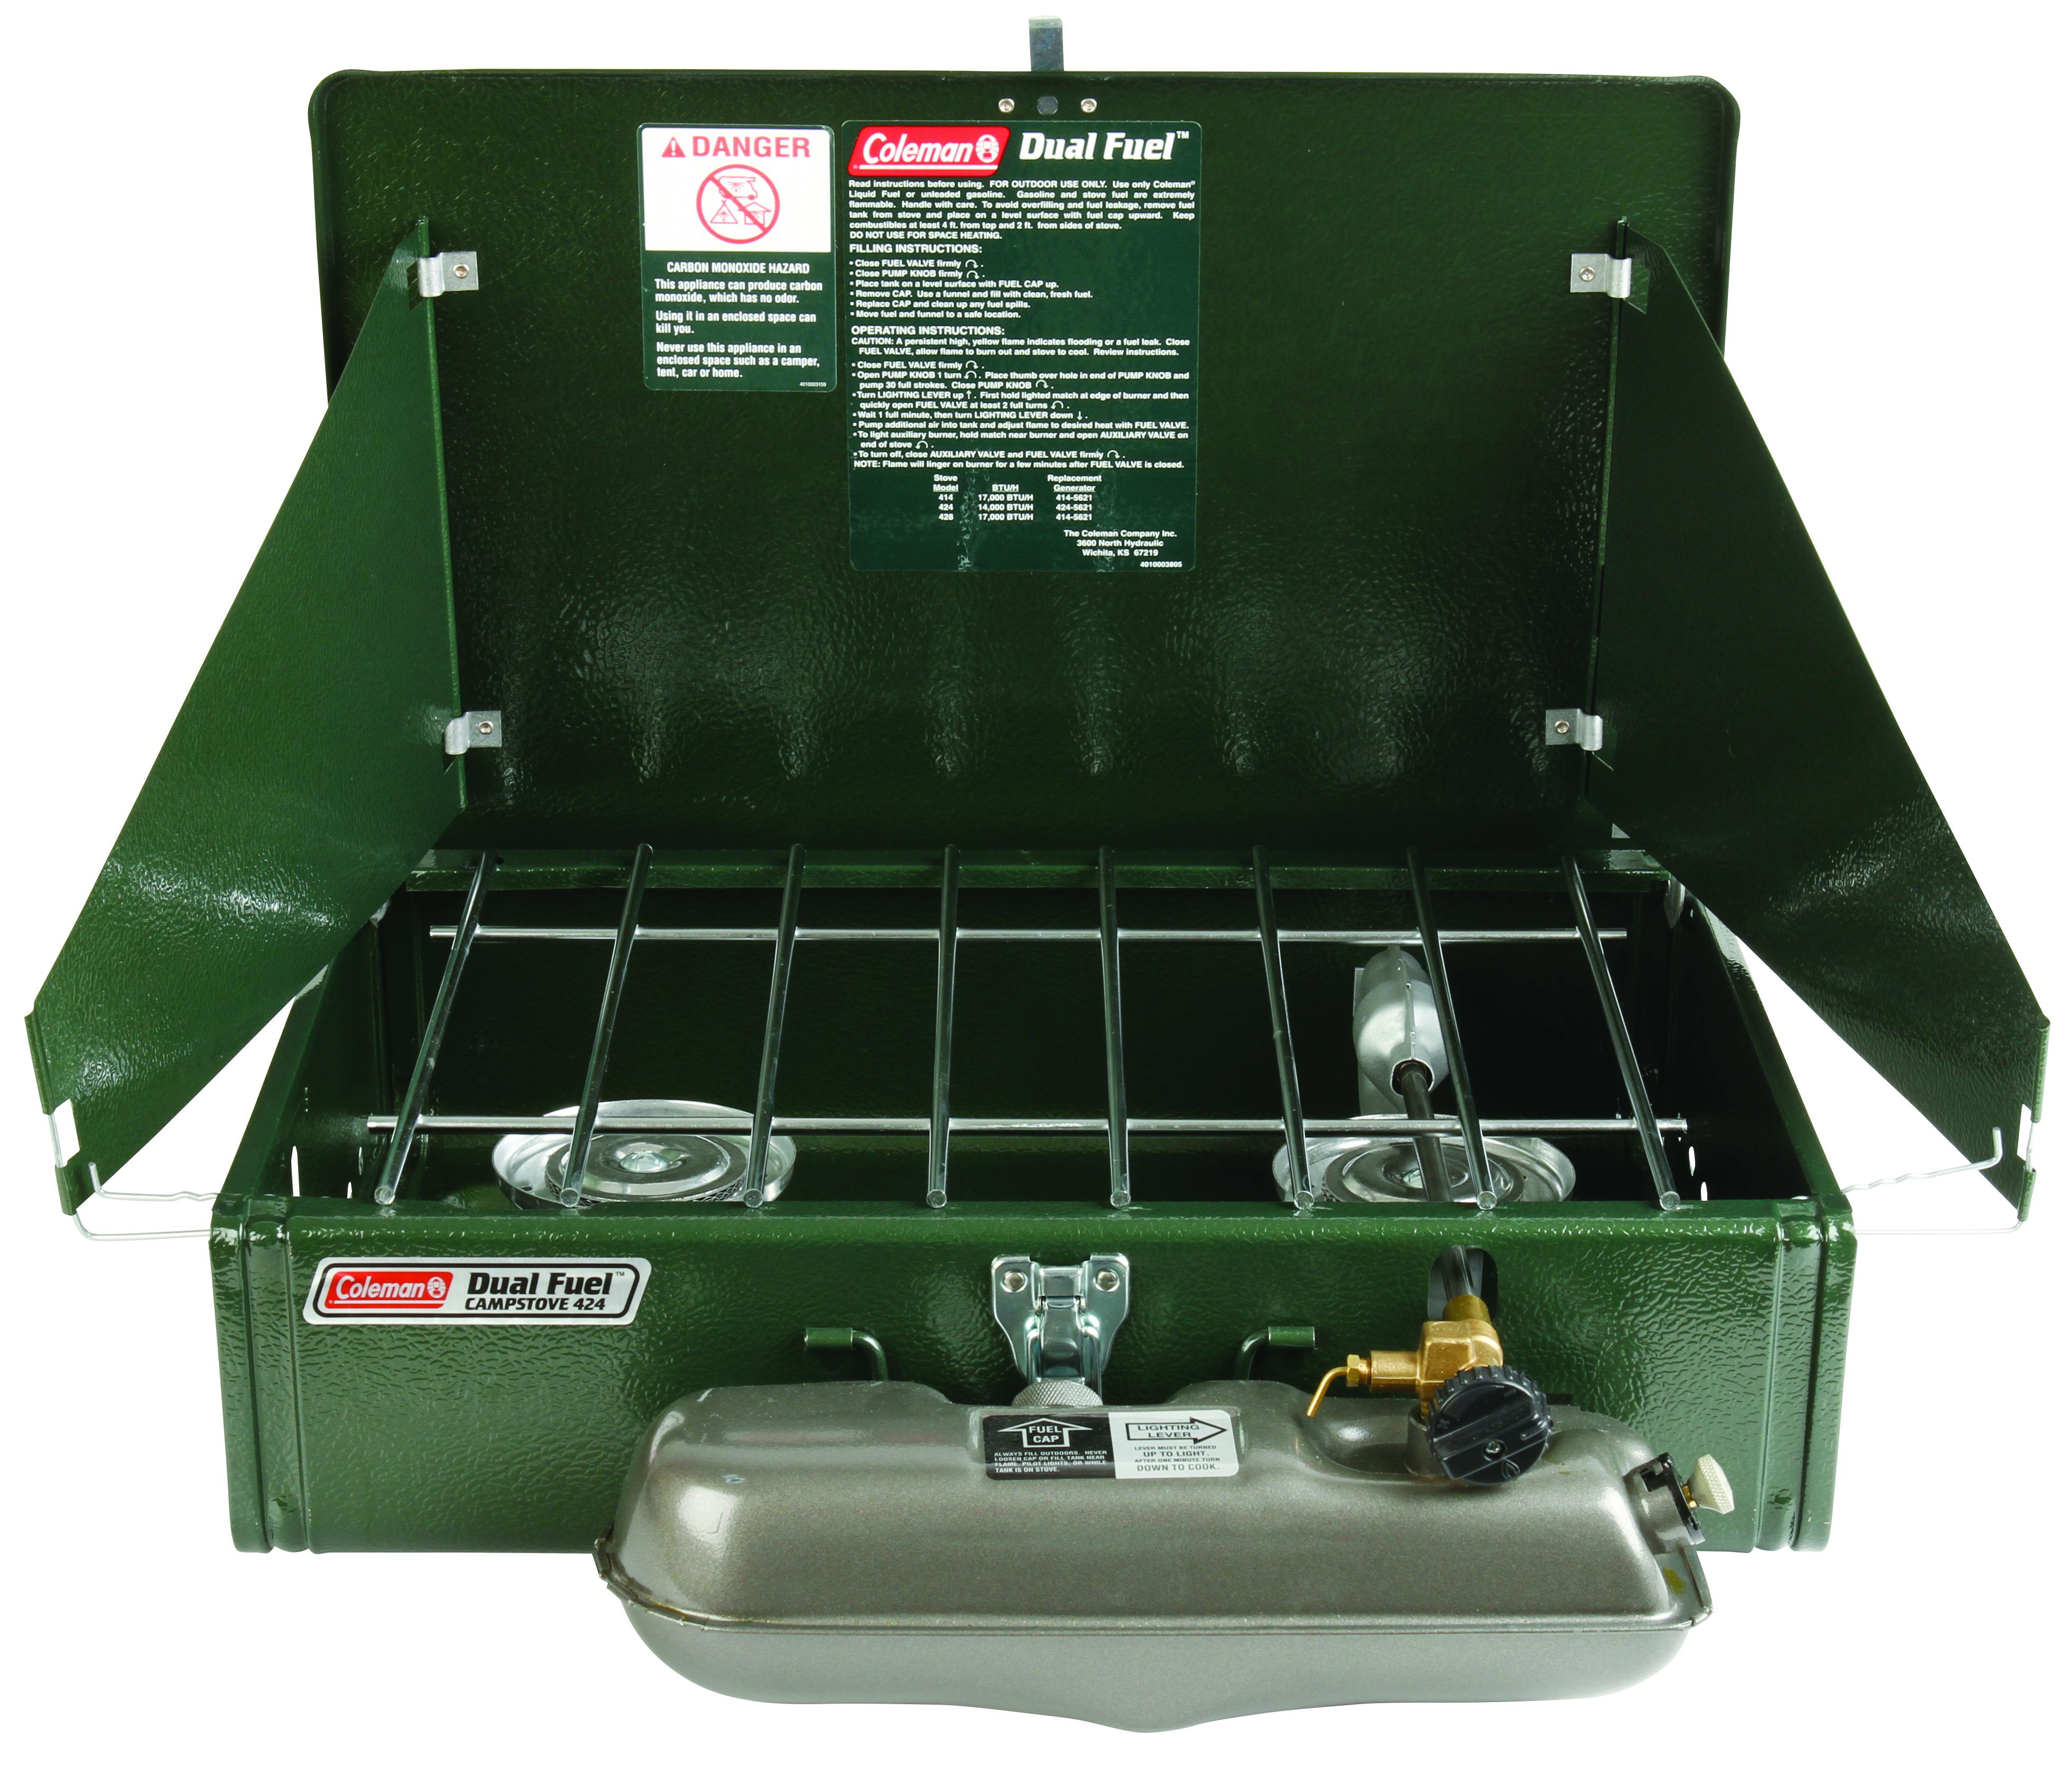 Guide Series® Dual Fuel™ Stove | Coleman